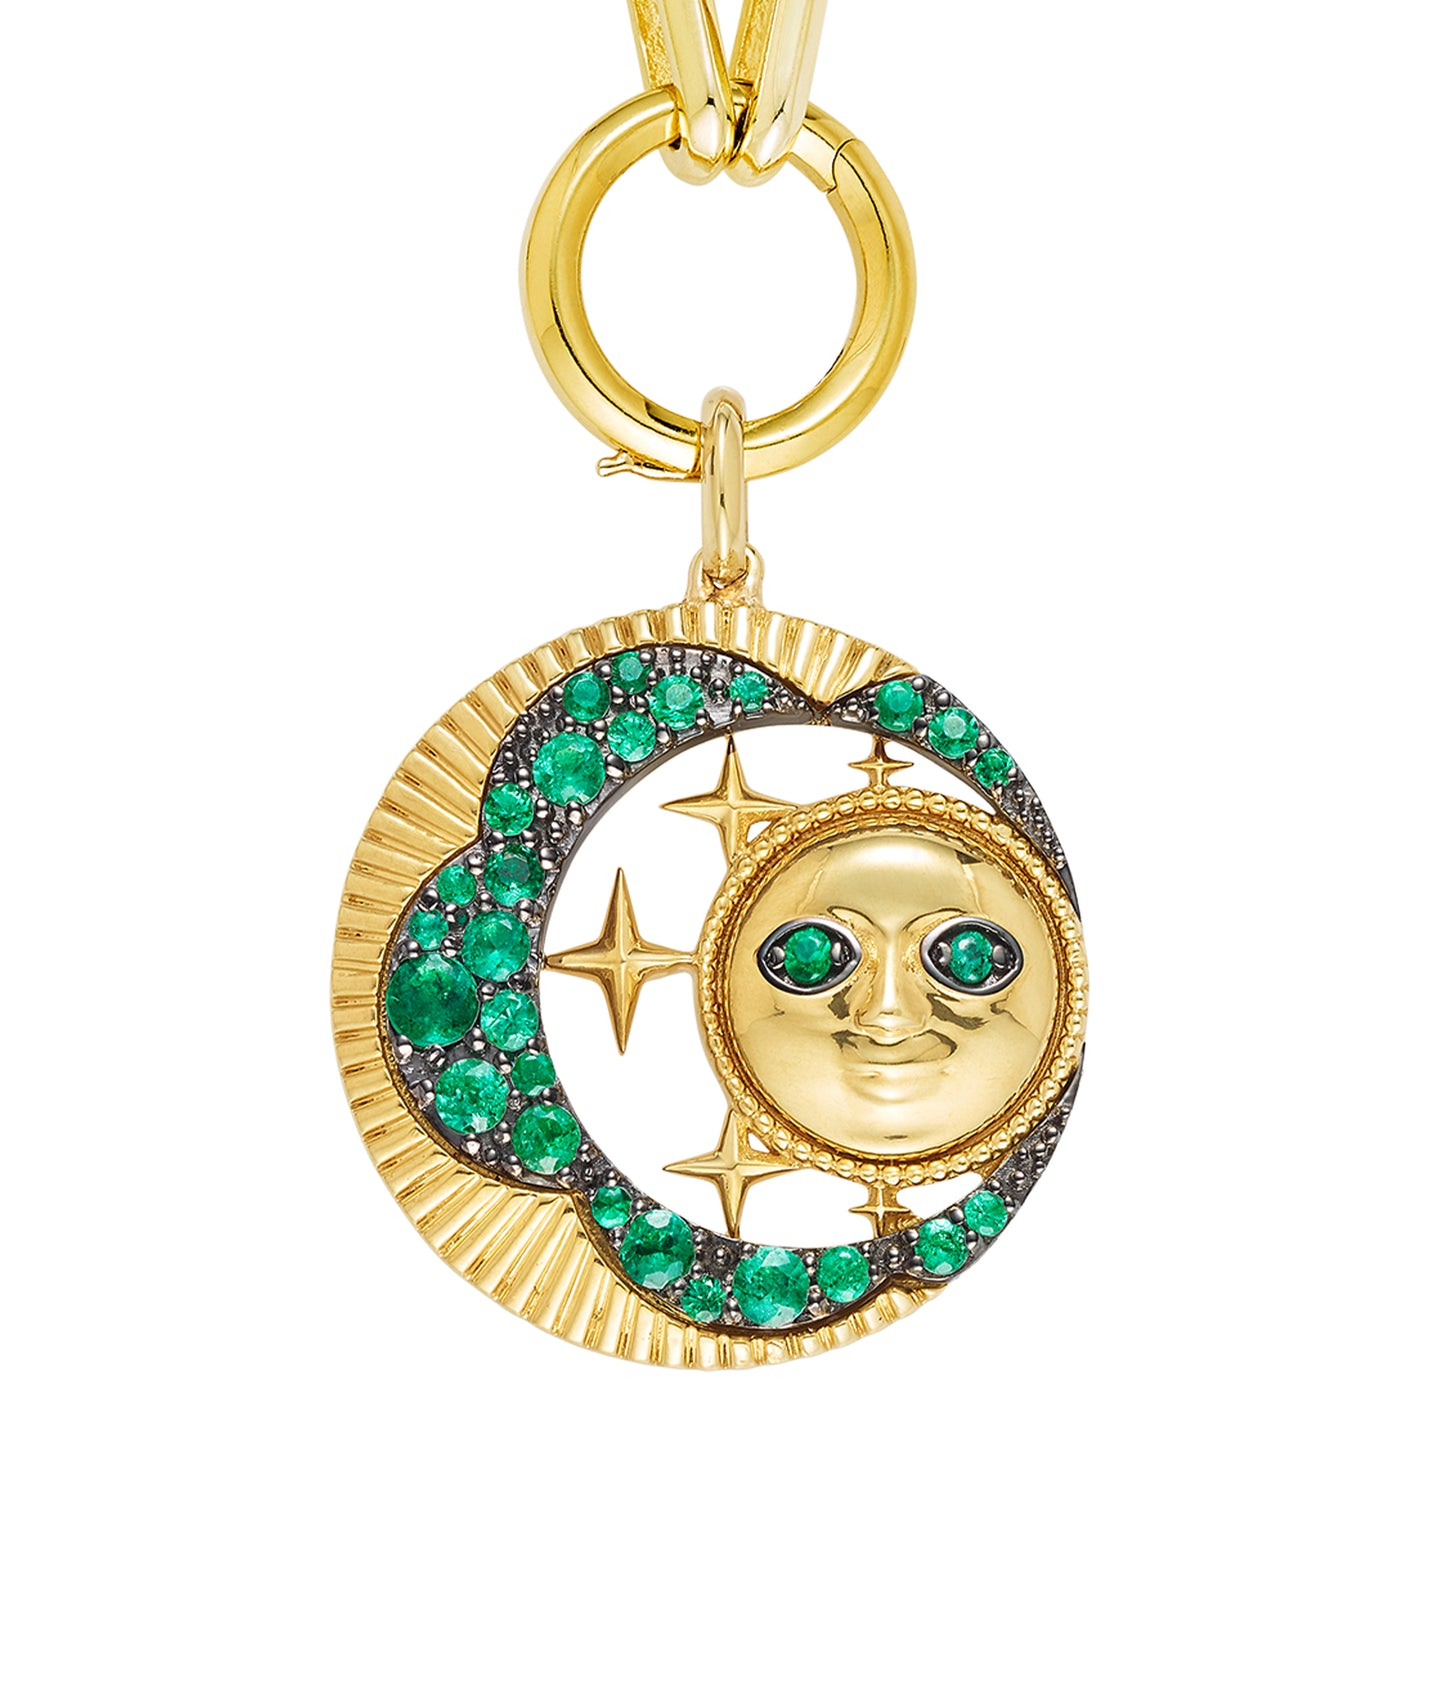 'Look Up At The Moon' Pendant Emerald